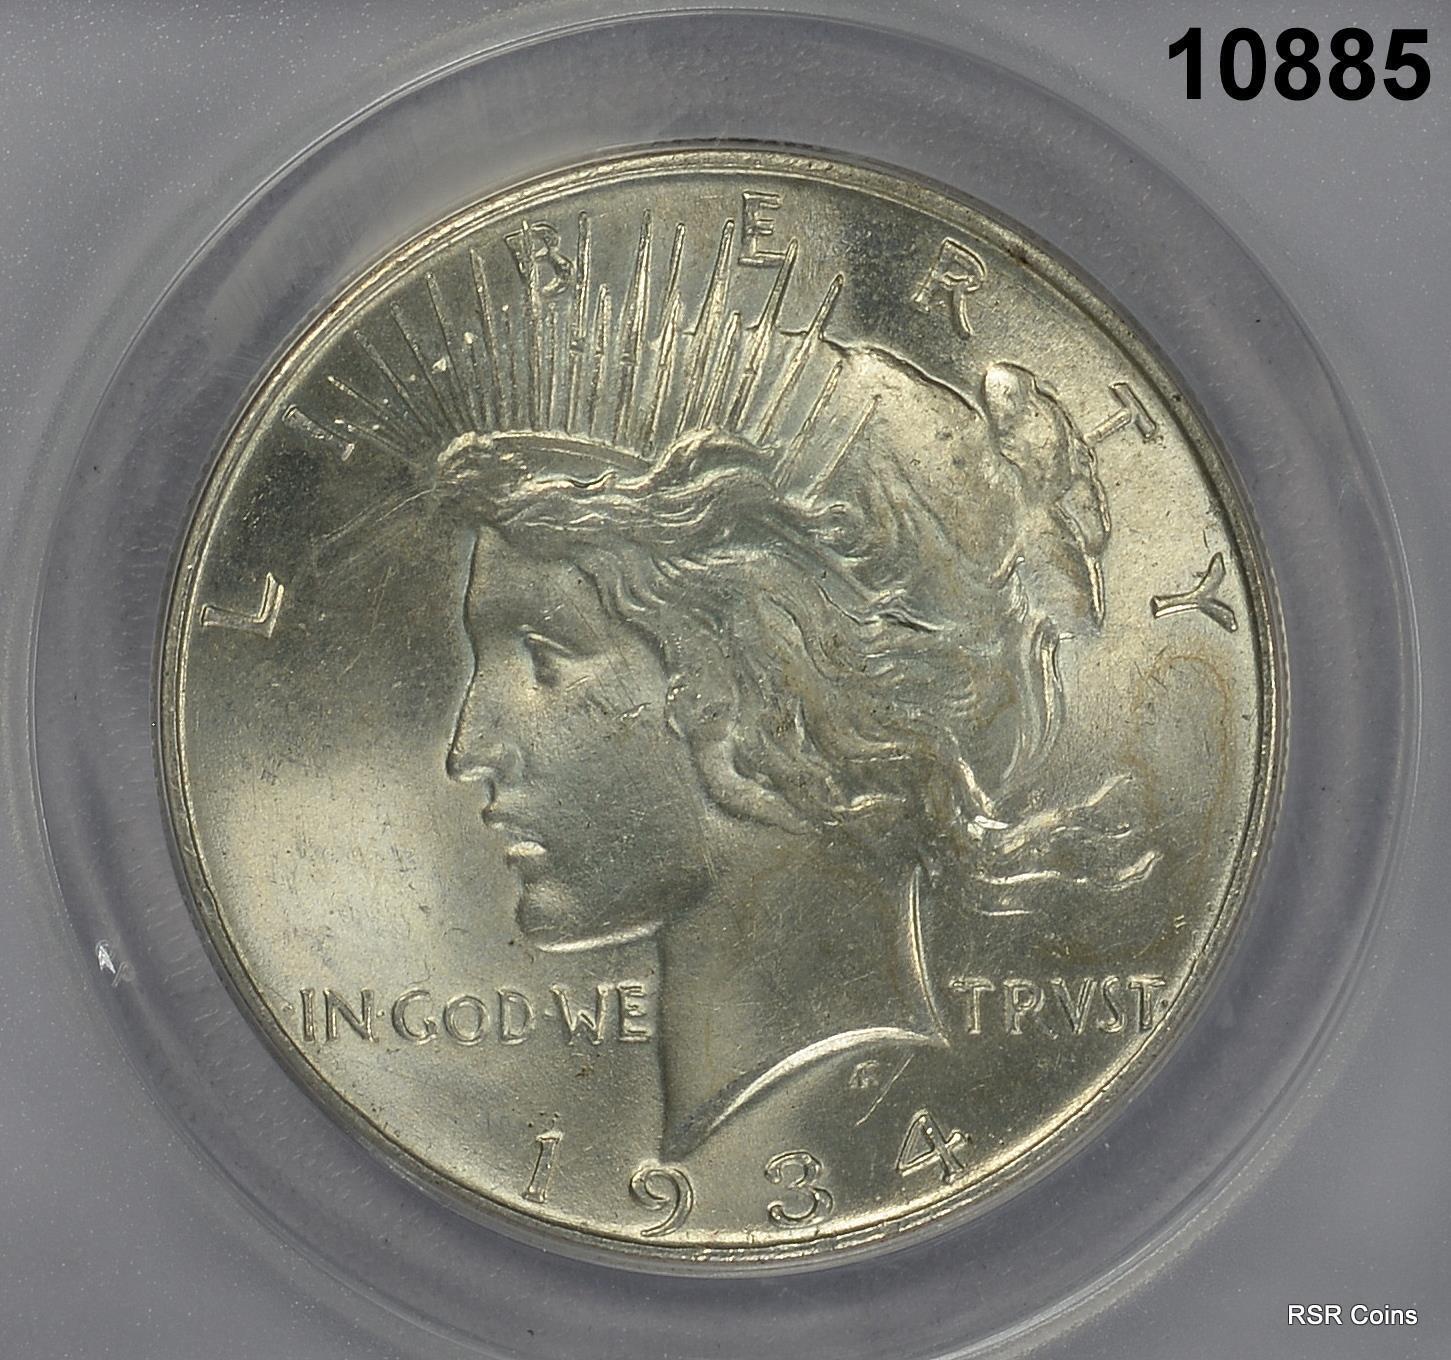 1934 PEACE SILVER DOLLAR ANACS CERTIFIED MS61 LOOKS BETTER! #10885